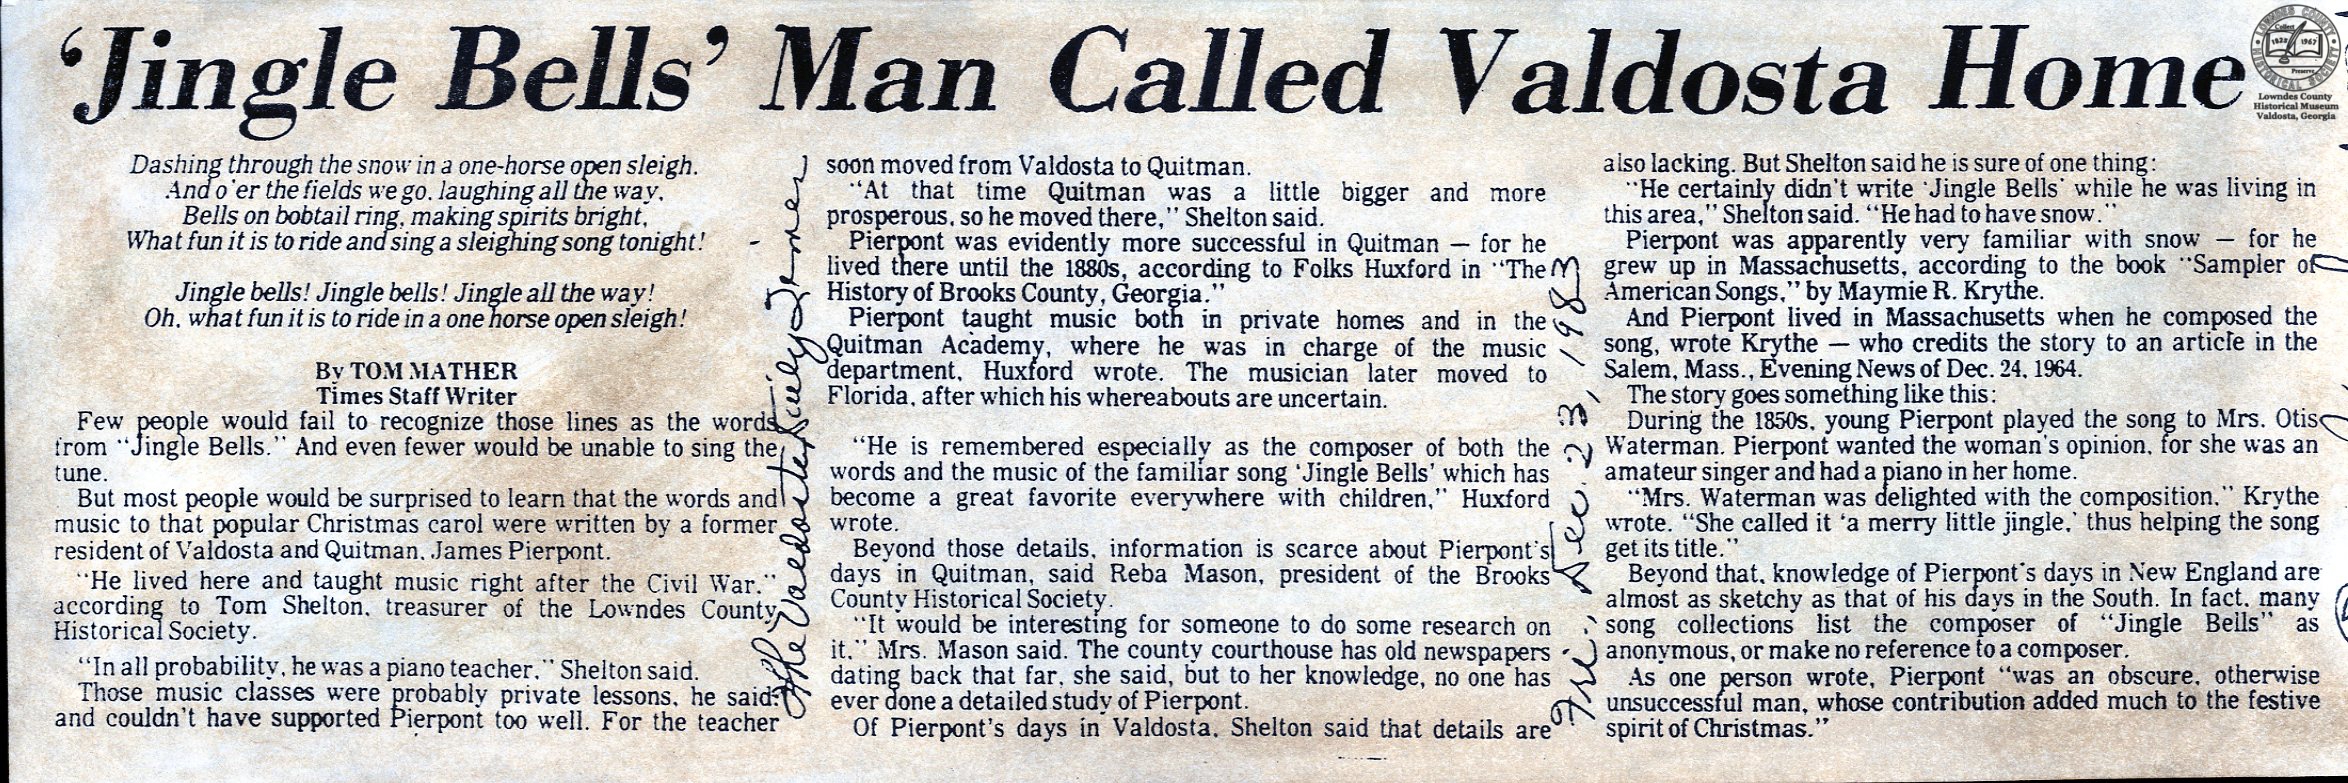 Article from the Valdosta Daily Times describing Pierpont's time in Valdosta.  From the Lowndes County Historical Museum's Susie McKey Thomas Newspaper Clippings Archives.